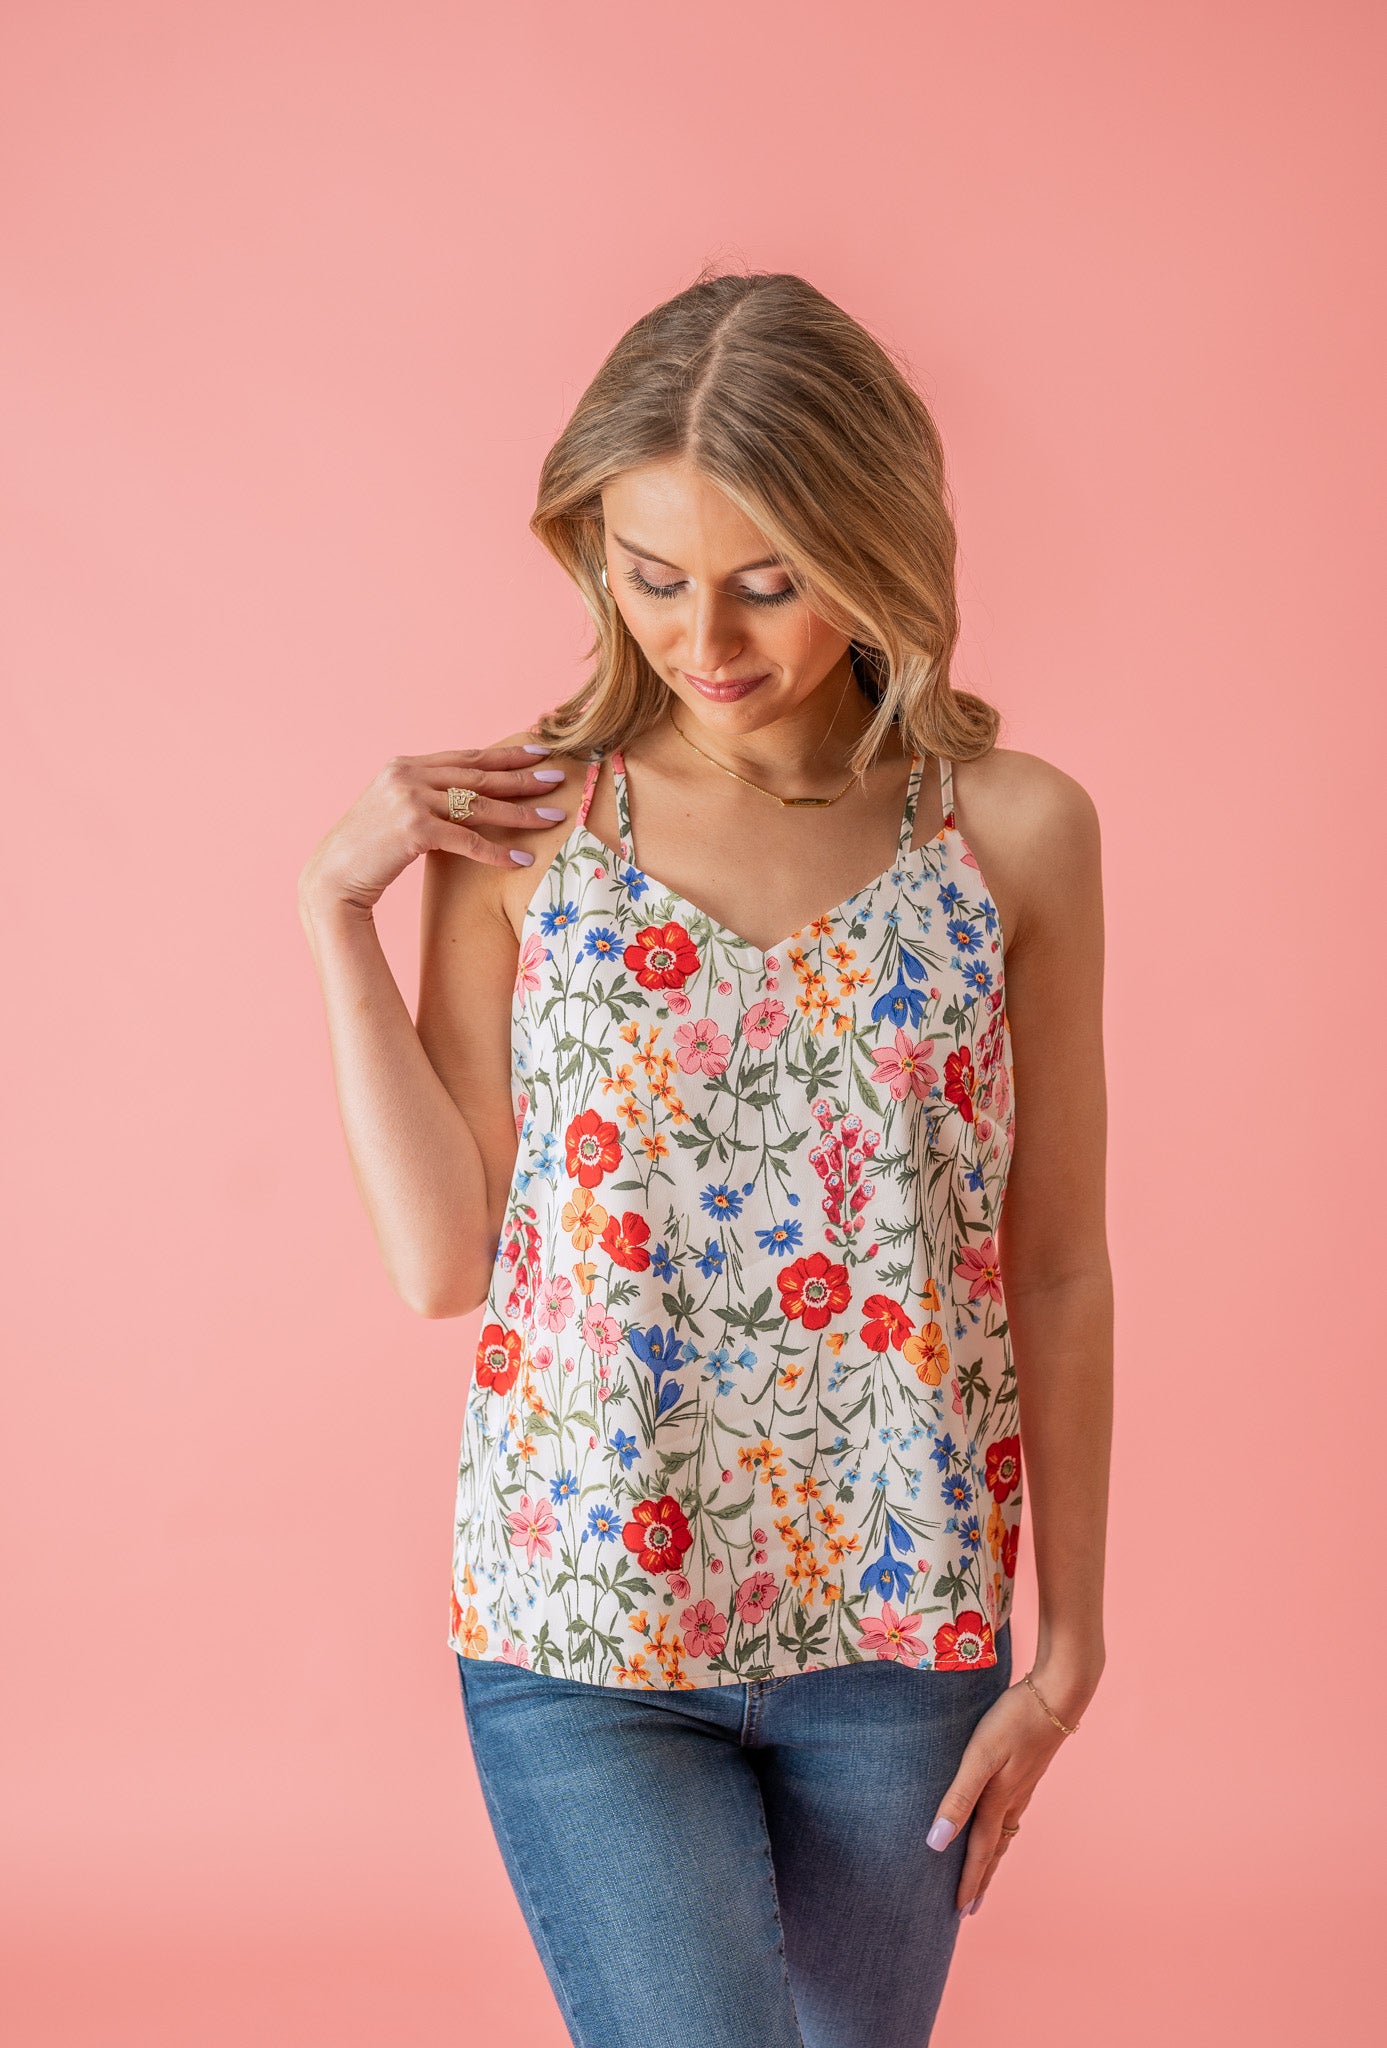 Whimsical Wildflower Cami Top